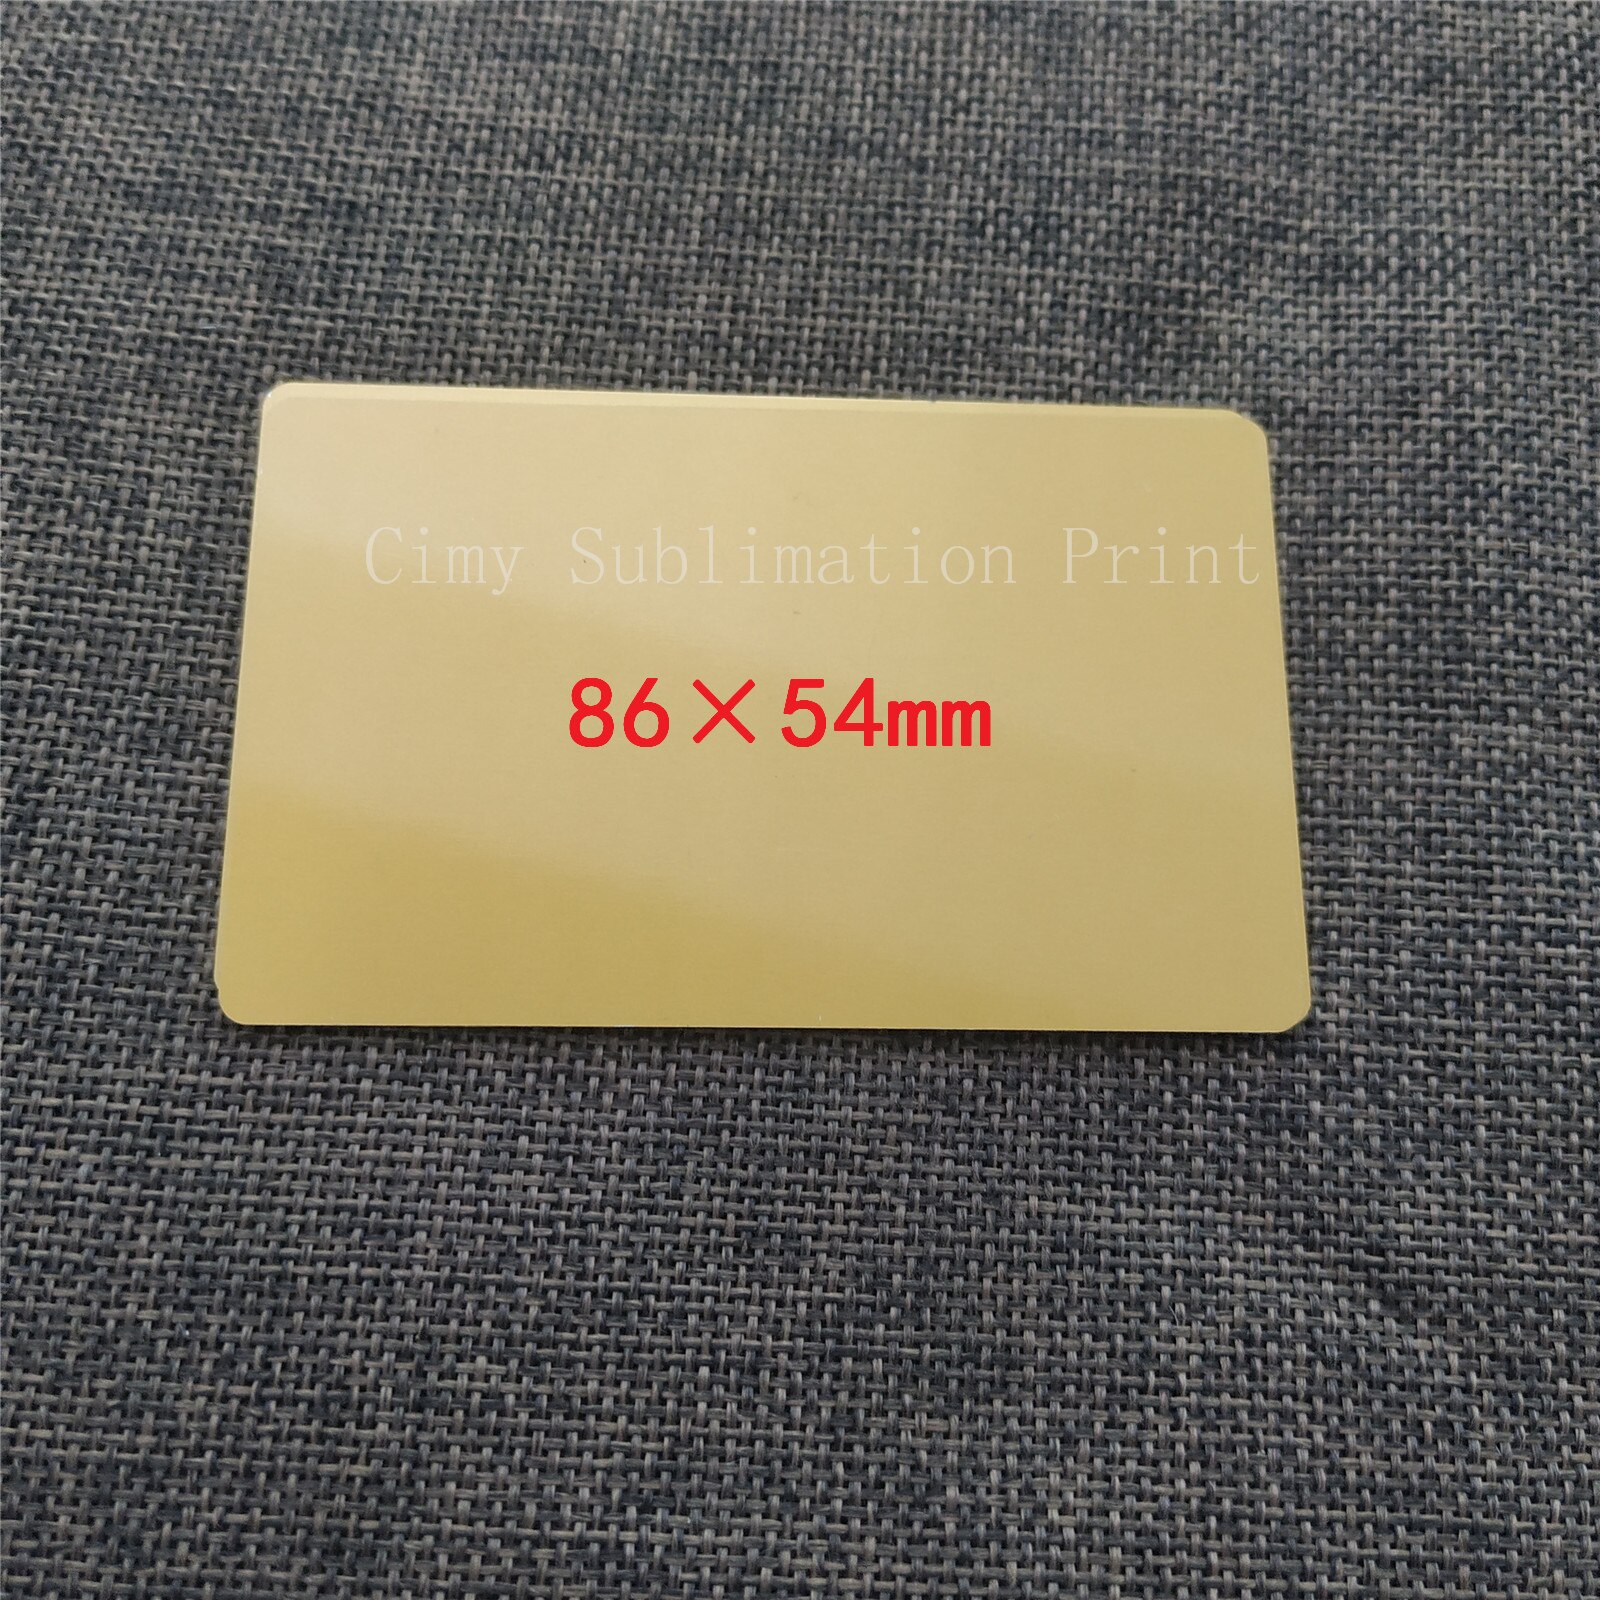 100sheets 0.45mm 86*54mm Blank Sublimation Metal Plate Aluminium sheet Name Card Printing Sublimation Ink Transfer DIY Craft: Golden